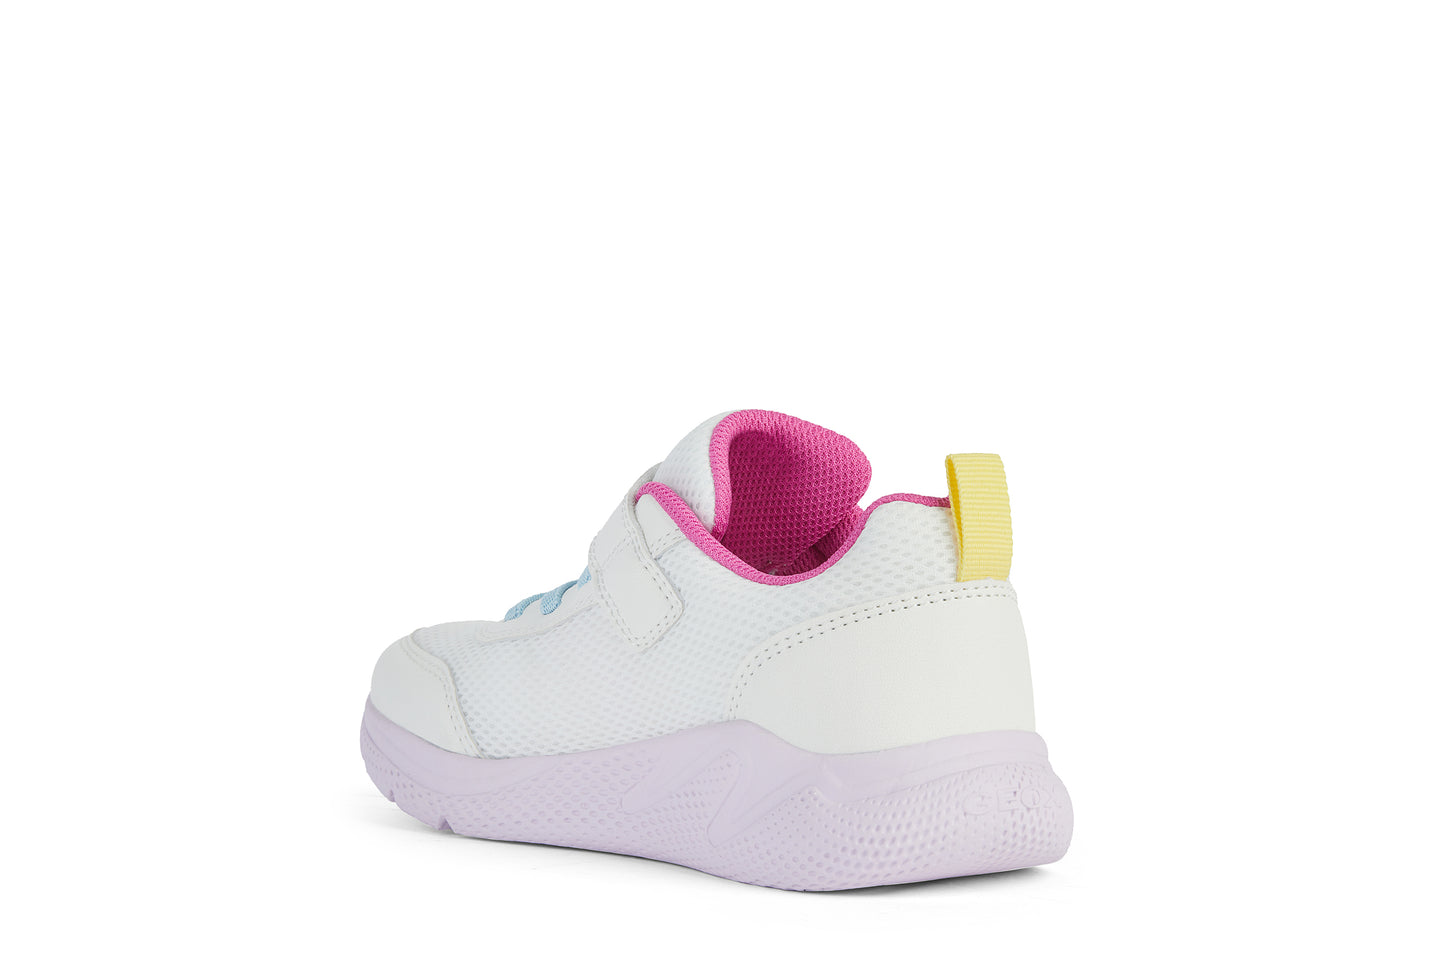 A girls trainer by Geox, style J Sprintye, in white with yellow and pink trim and velcro and blue bungee lace fastening. Angled view of left side.